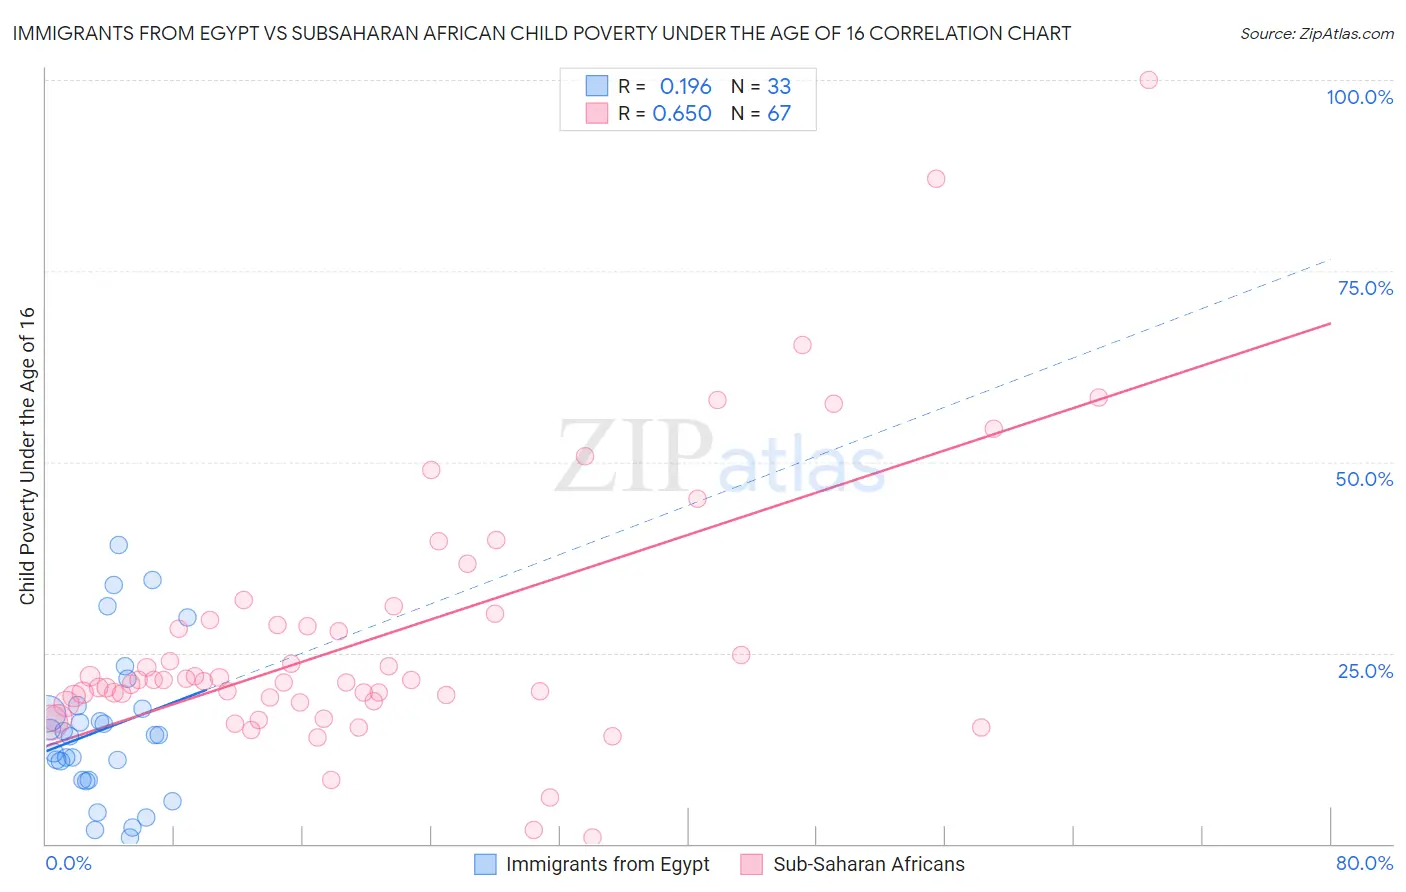 Immigrants from Egypt vs Subsaharan African Child Poverty Under the Age of 16